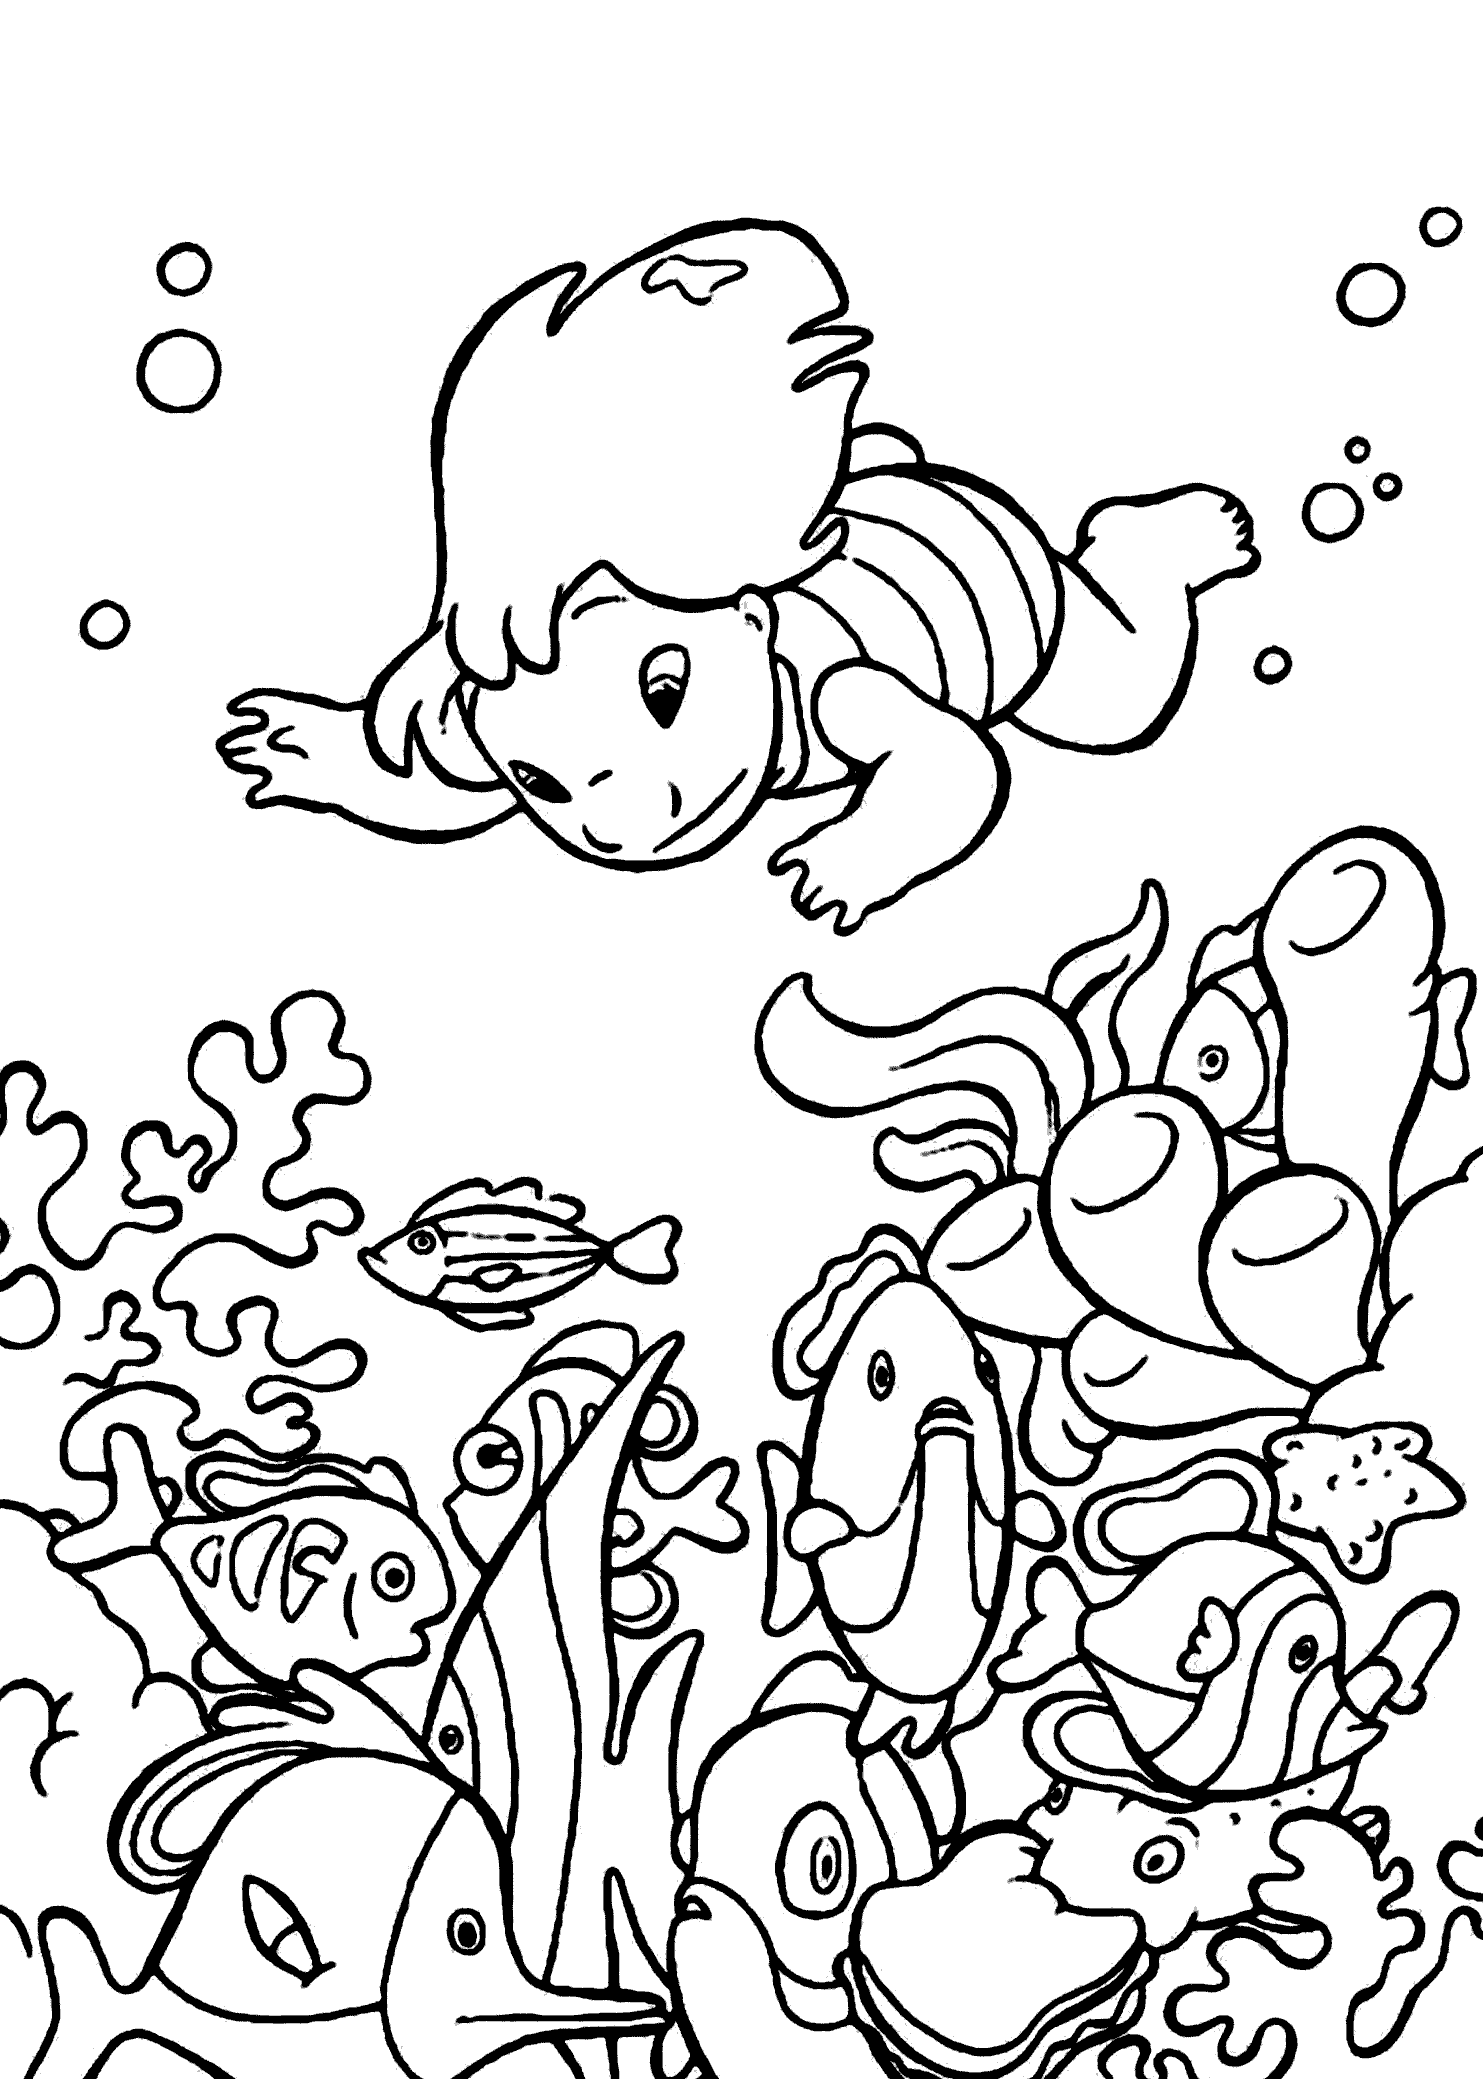 Download Underwater Coloring Pages - Coloring Home